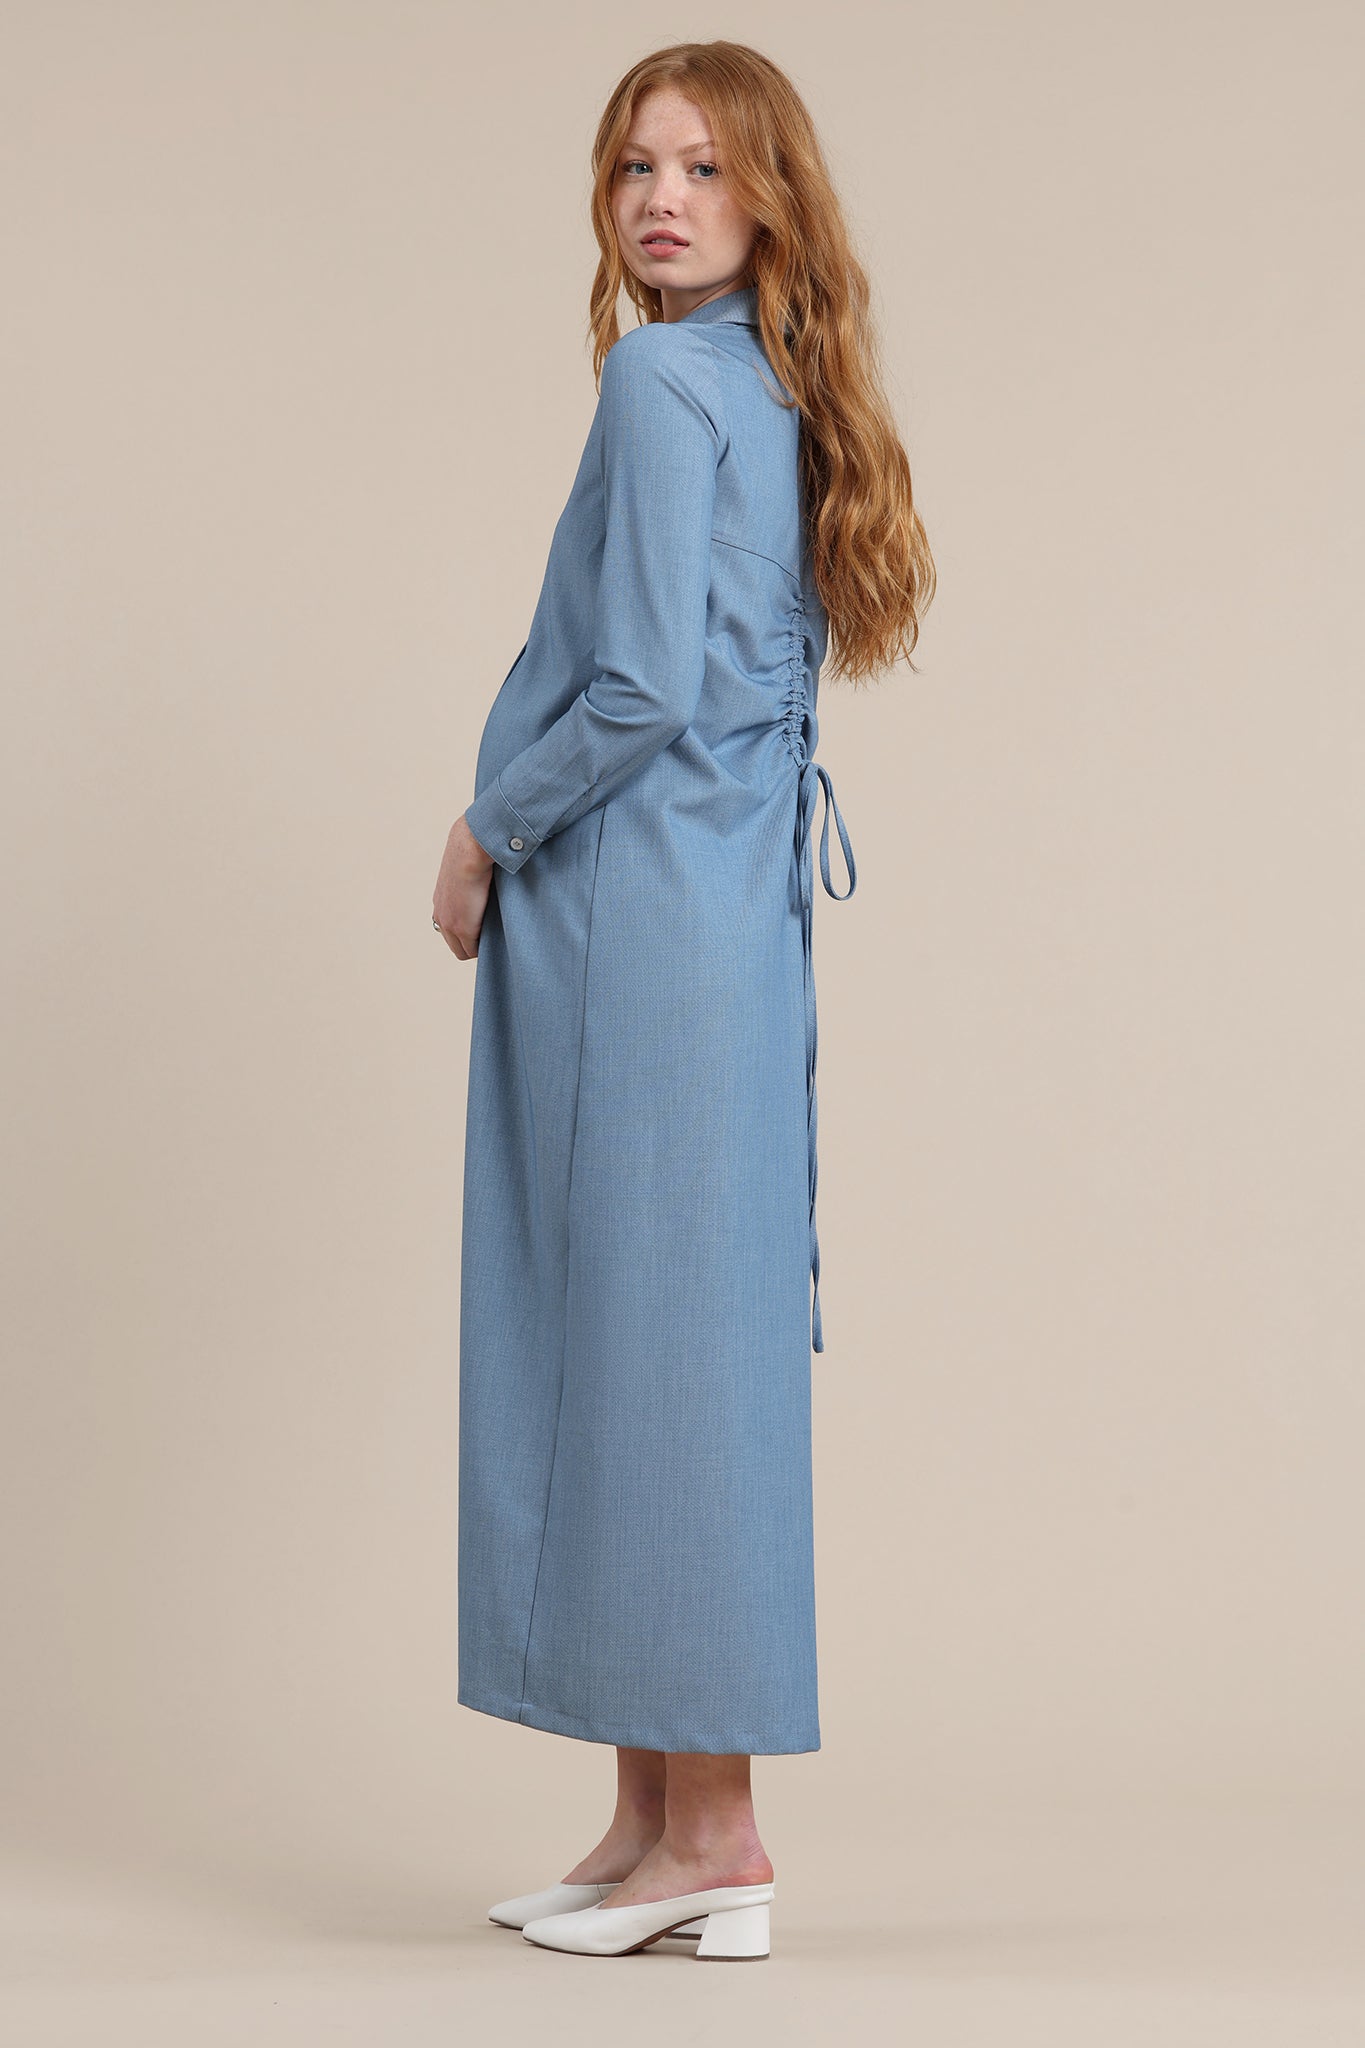 Erica Dress in Blue Chambray